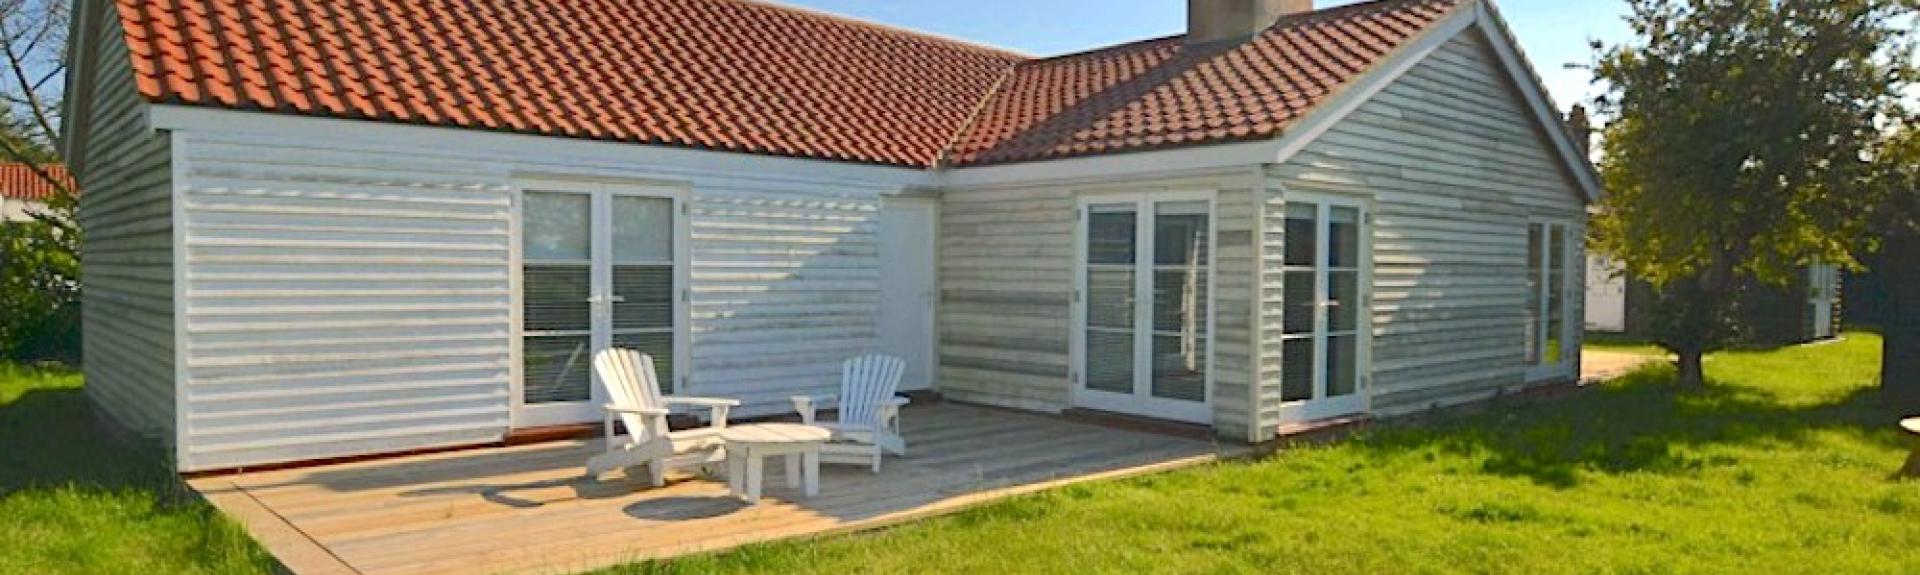 An L-shaped, wood-panelled Essex holiday bungalow with a wooden deck containing a table and sunlounger all overlooking a large lawn.